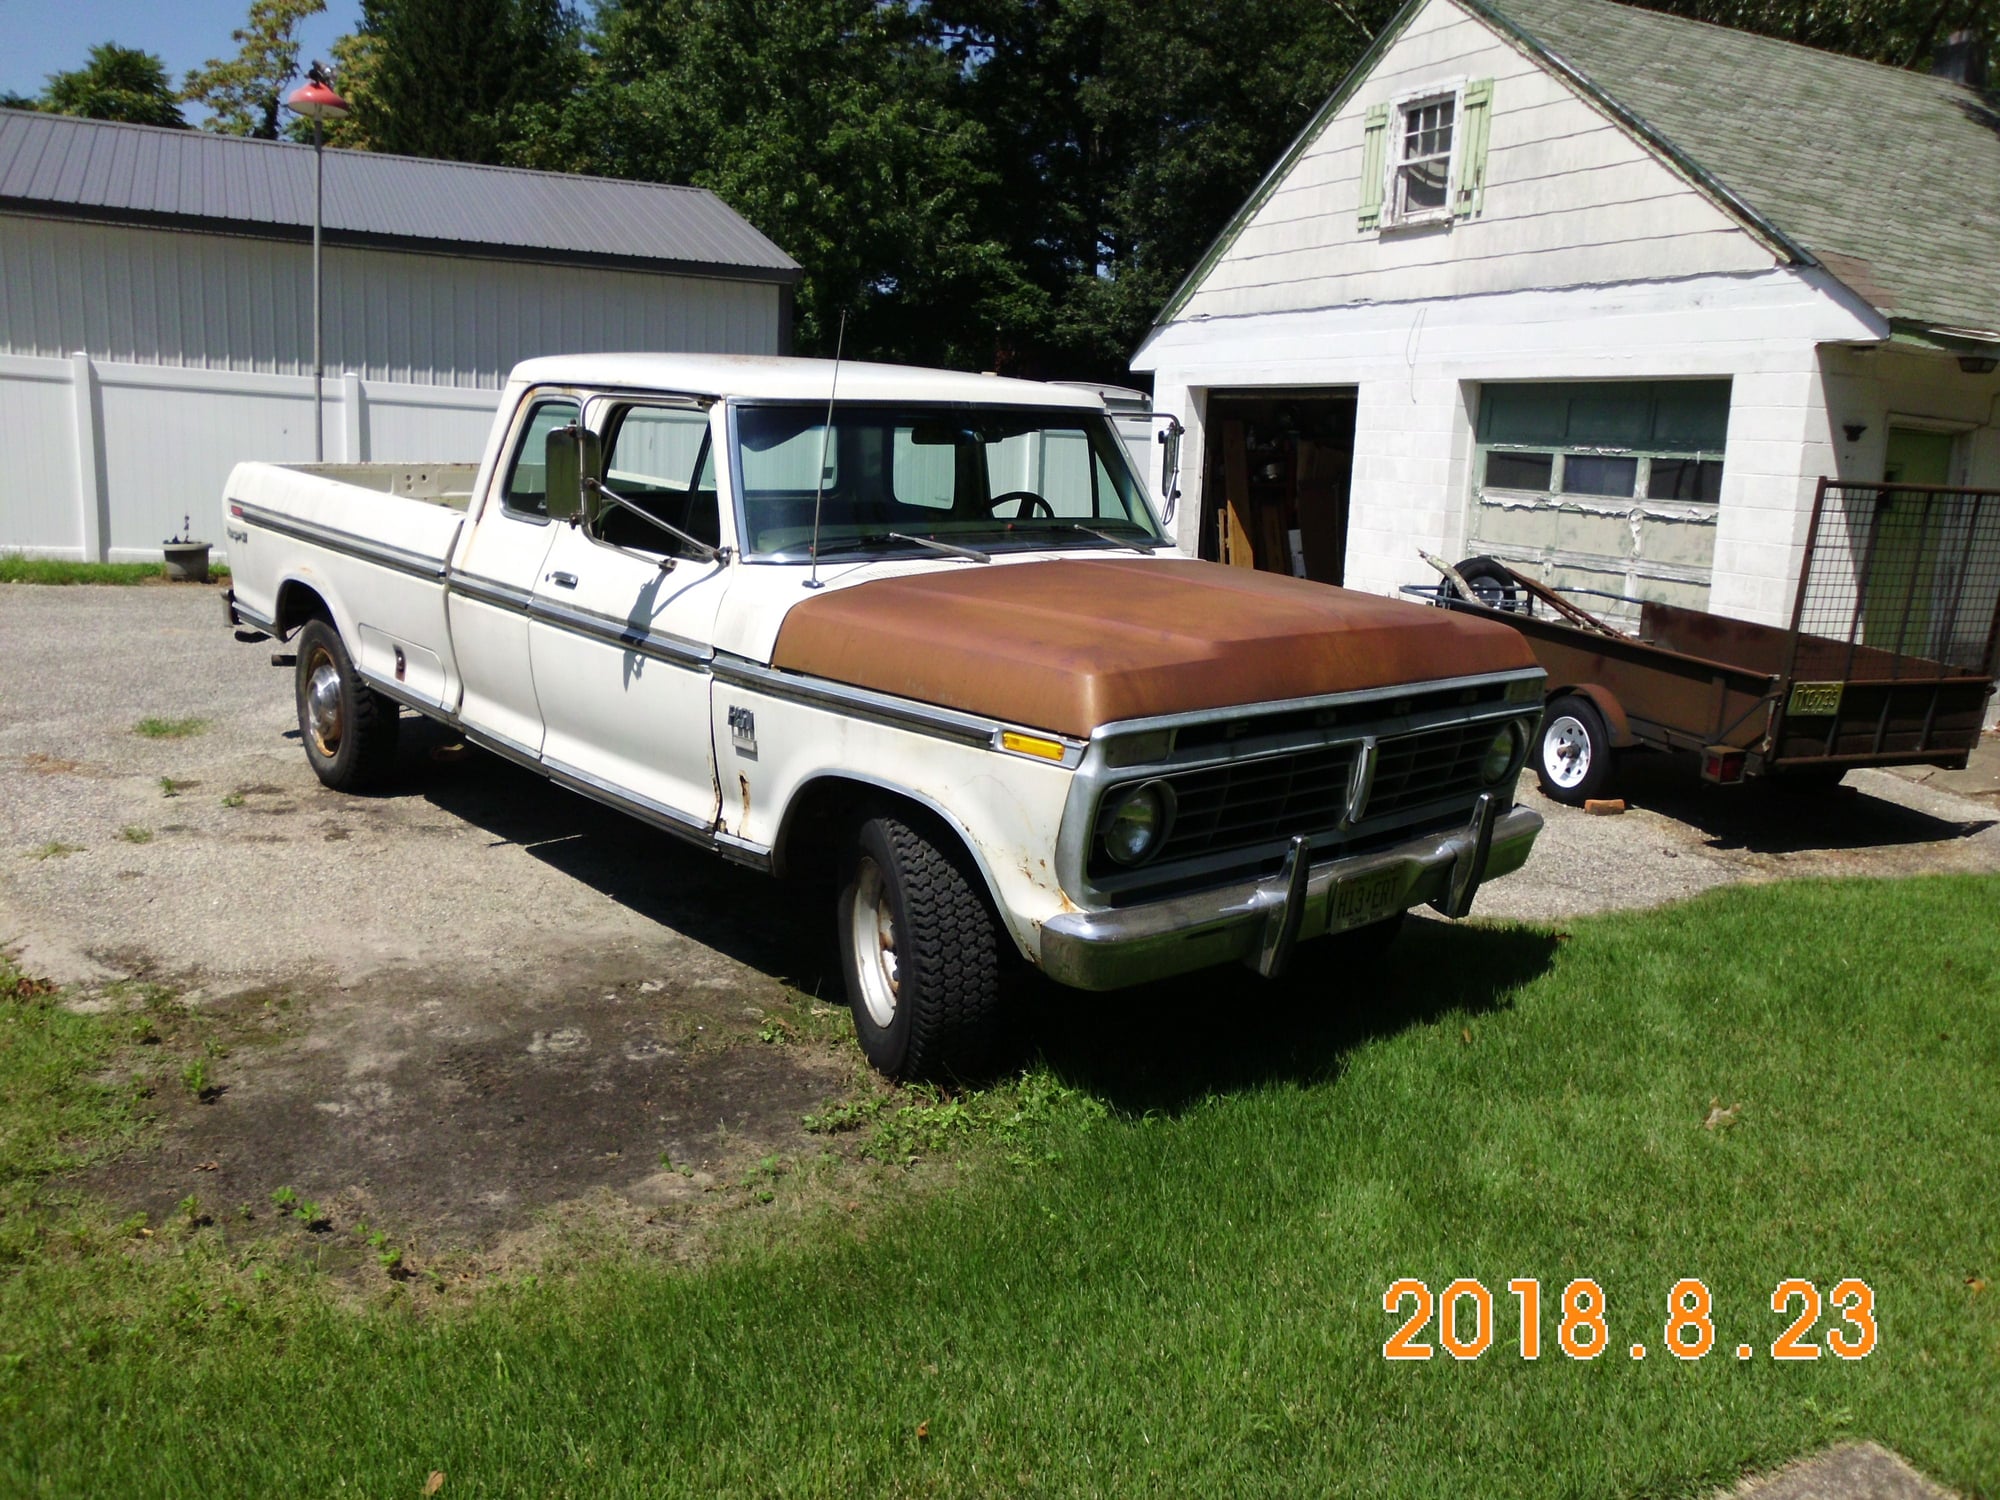 1975 Ford F-250 - 1975 Ford F-250 XLT Ranger, Super Cab Camper Special. - Used - VIN F25YKX61539000000 - 87,231 Miles - 8 cyl - 2WD - Manual - Truck - White - Hammonton, NJ 08037, United States